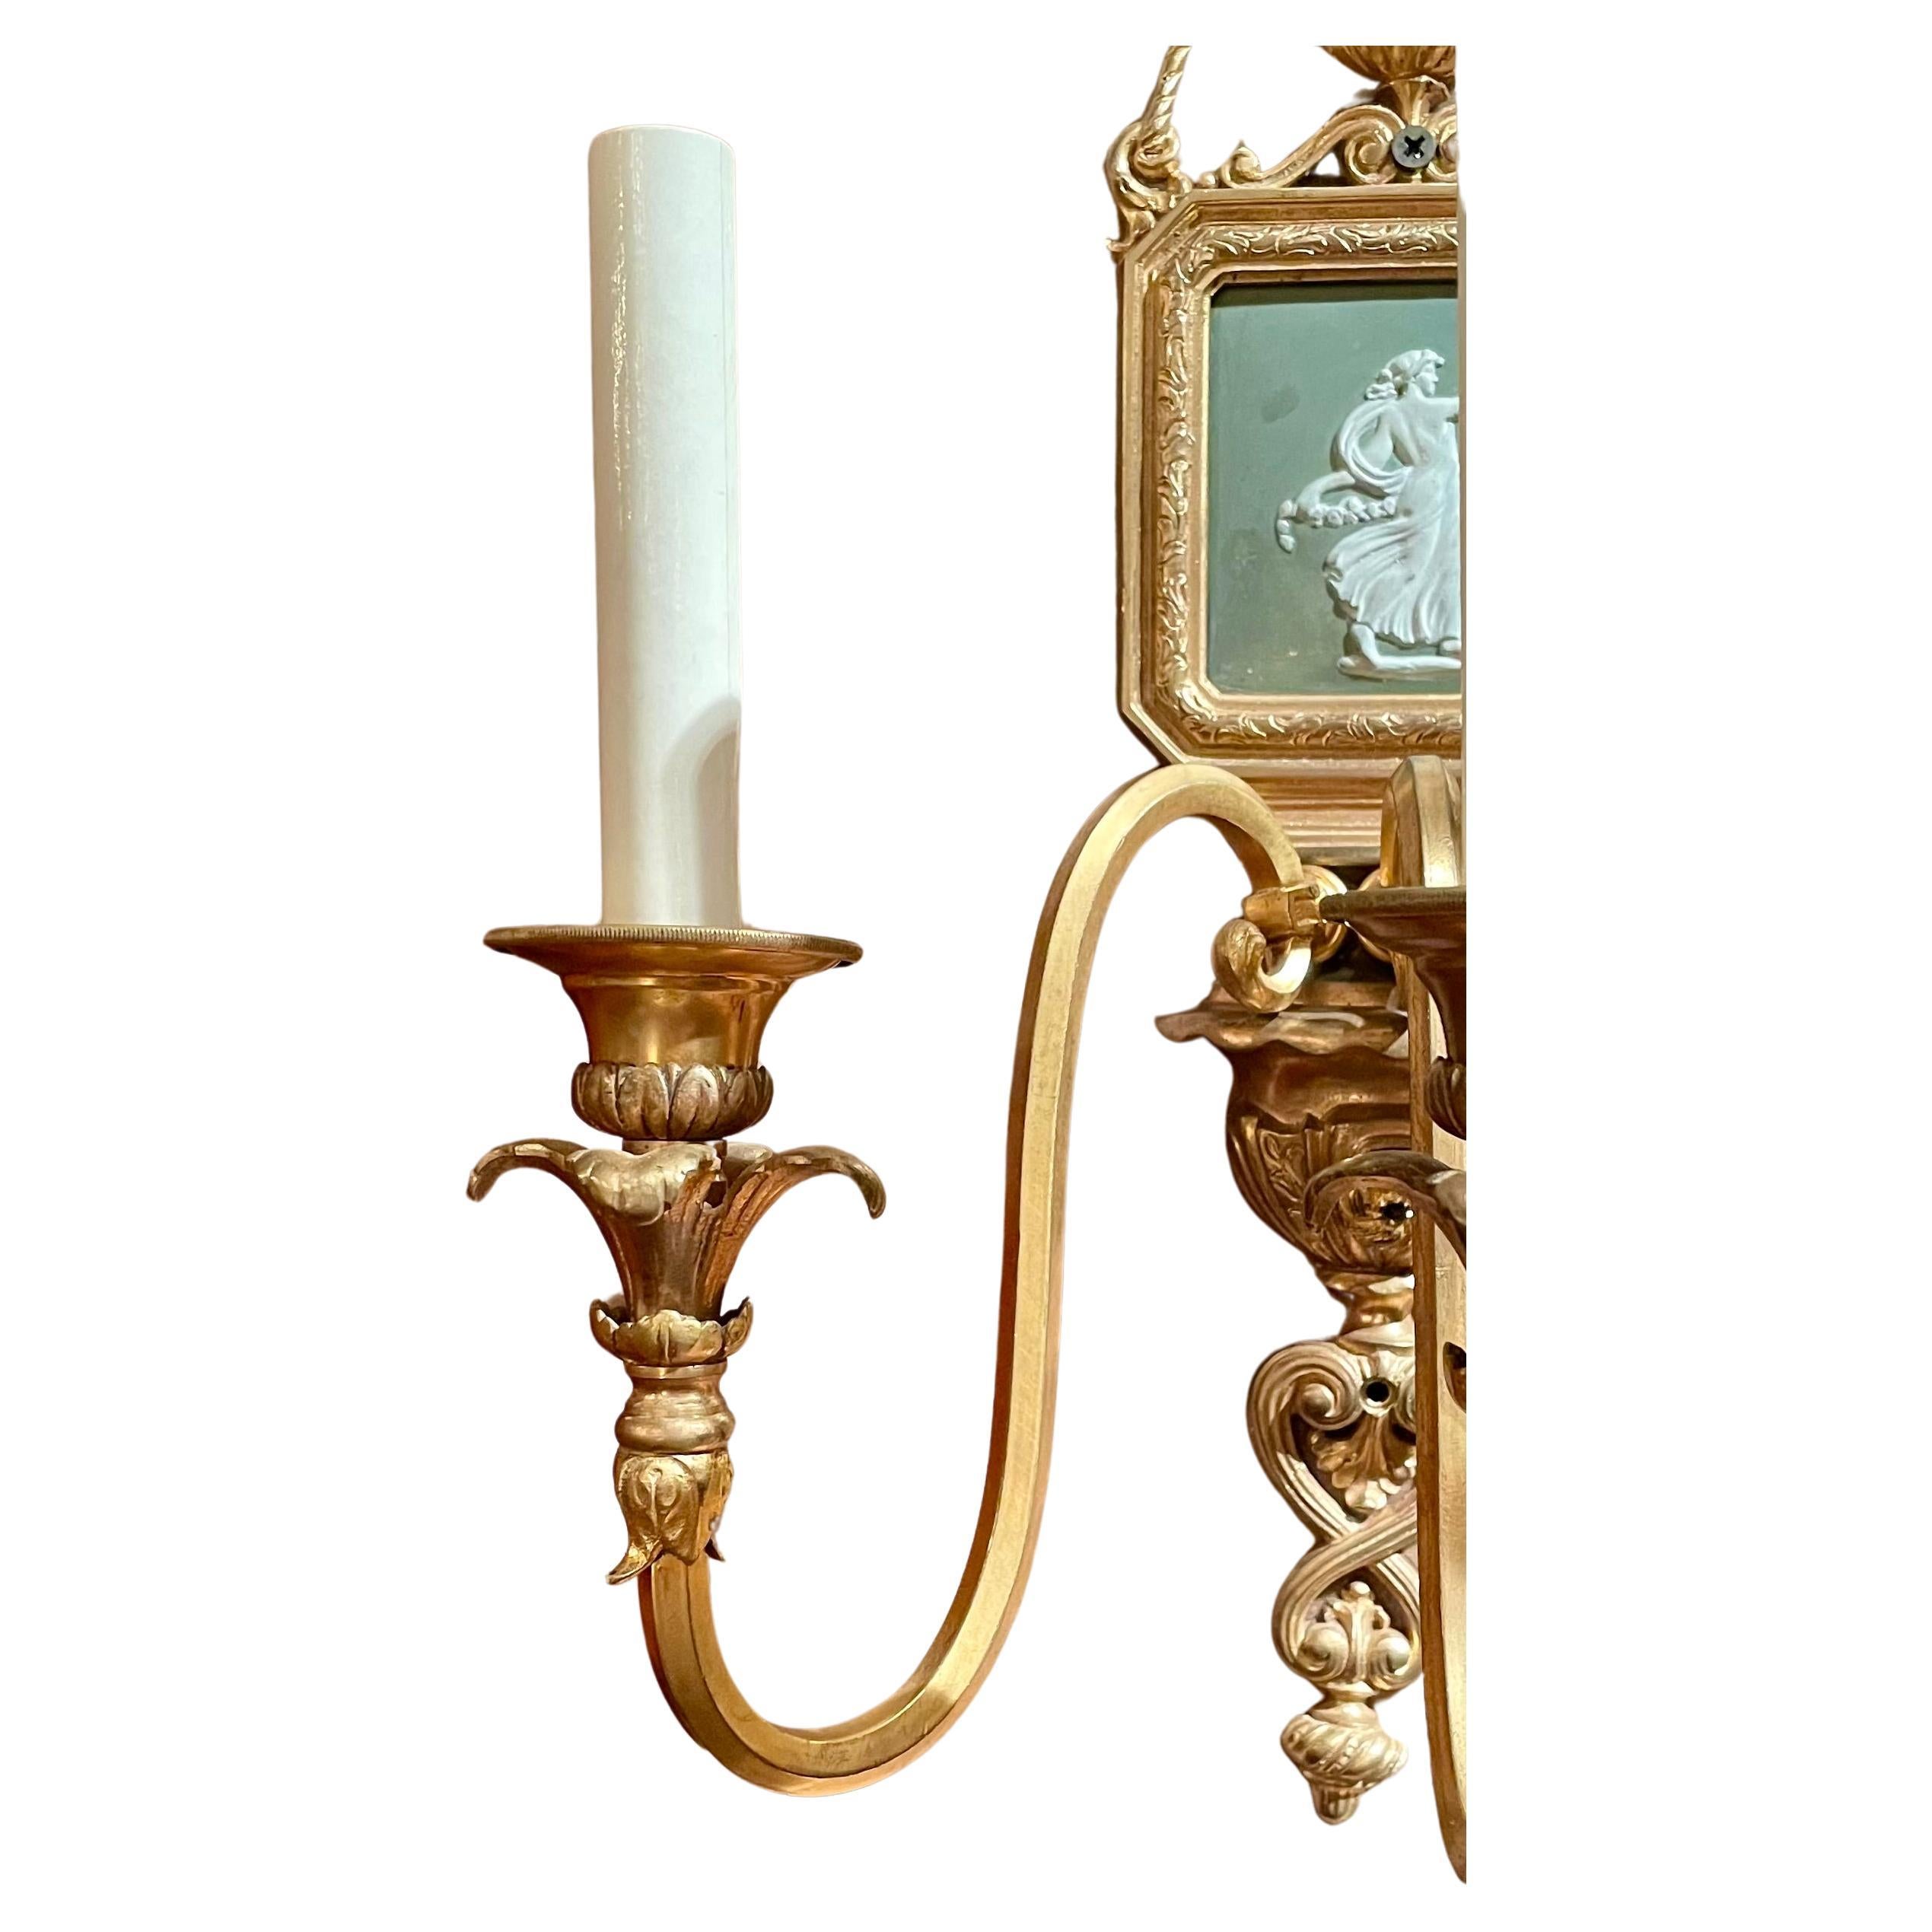 Pair Antique English Gold Bronze & Wedgwood Porcelain Wall Sconces, Circa 1890. For Sale 1